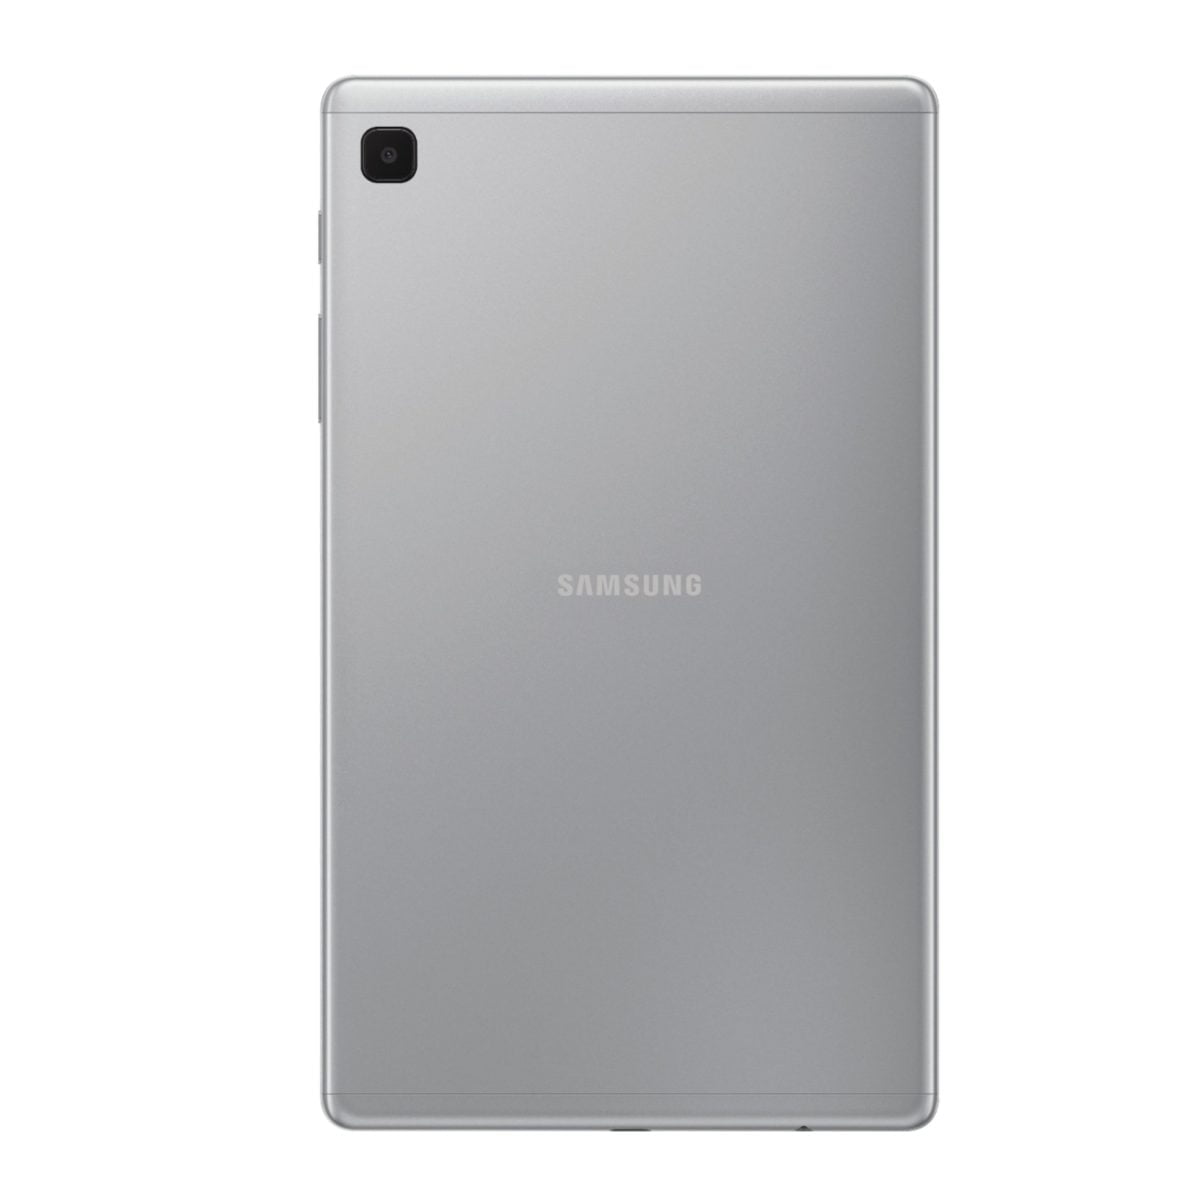 6464588Cv11D Scaled Samsung &Lt;H1&Gt;Samsung Galaxy Tab A7 Lite 32Gb - ‎Silver&Lt;/H1&Gt; Meet The Device Your Whole Family Will Love: Samsung Galaxy Tab A7 Lite, The Tablet That'S Made To Be Shared. With Its Compact 8.7&Quot; Screen, Galaxy Tab A7 Lite Is Perfectly Sized For Entertainment On The Go. Its Sturdy Metal Frame Is Built To Be Brought Along From The Living Room To Your Beach Vacation, Or Wherever You Want To Take It. Galaxy Tab A7 Lite Comes With Access To Hours Of Ad-Free Youtube Premium And Samsung Tv At No Extra Charge So You Can Keep The Family Happy Without Annoying Interruptions. Plus, With A Powerful Processor For Fast Streaming And Plenty Of Storage For Your Favorite Files, Galaxy Tab A7 Lite Simplifies Entertainment Needs For Everyone Under Your Roof. Samsung Galaxy Tab Samsung Galaxy Tab A7 Lite 32Gb Wi-Fi - Silver